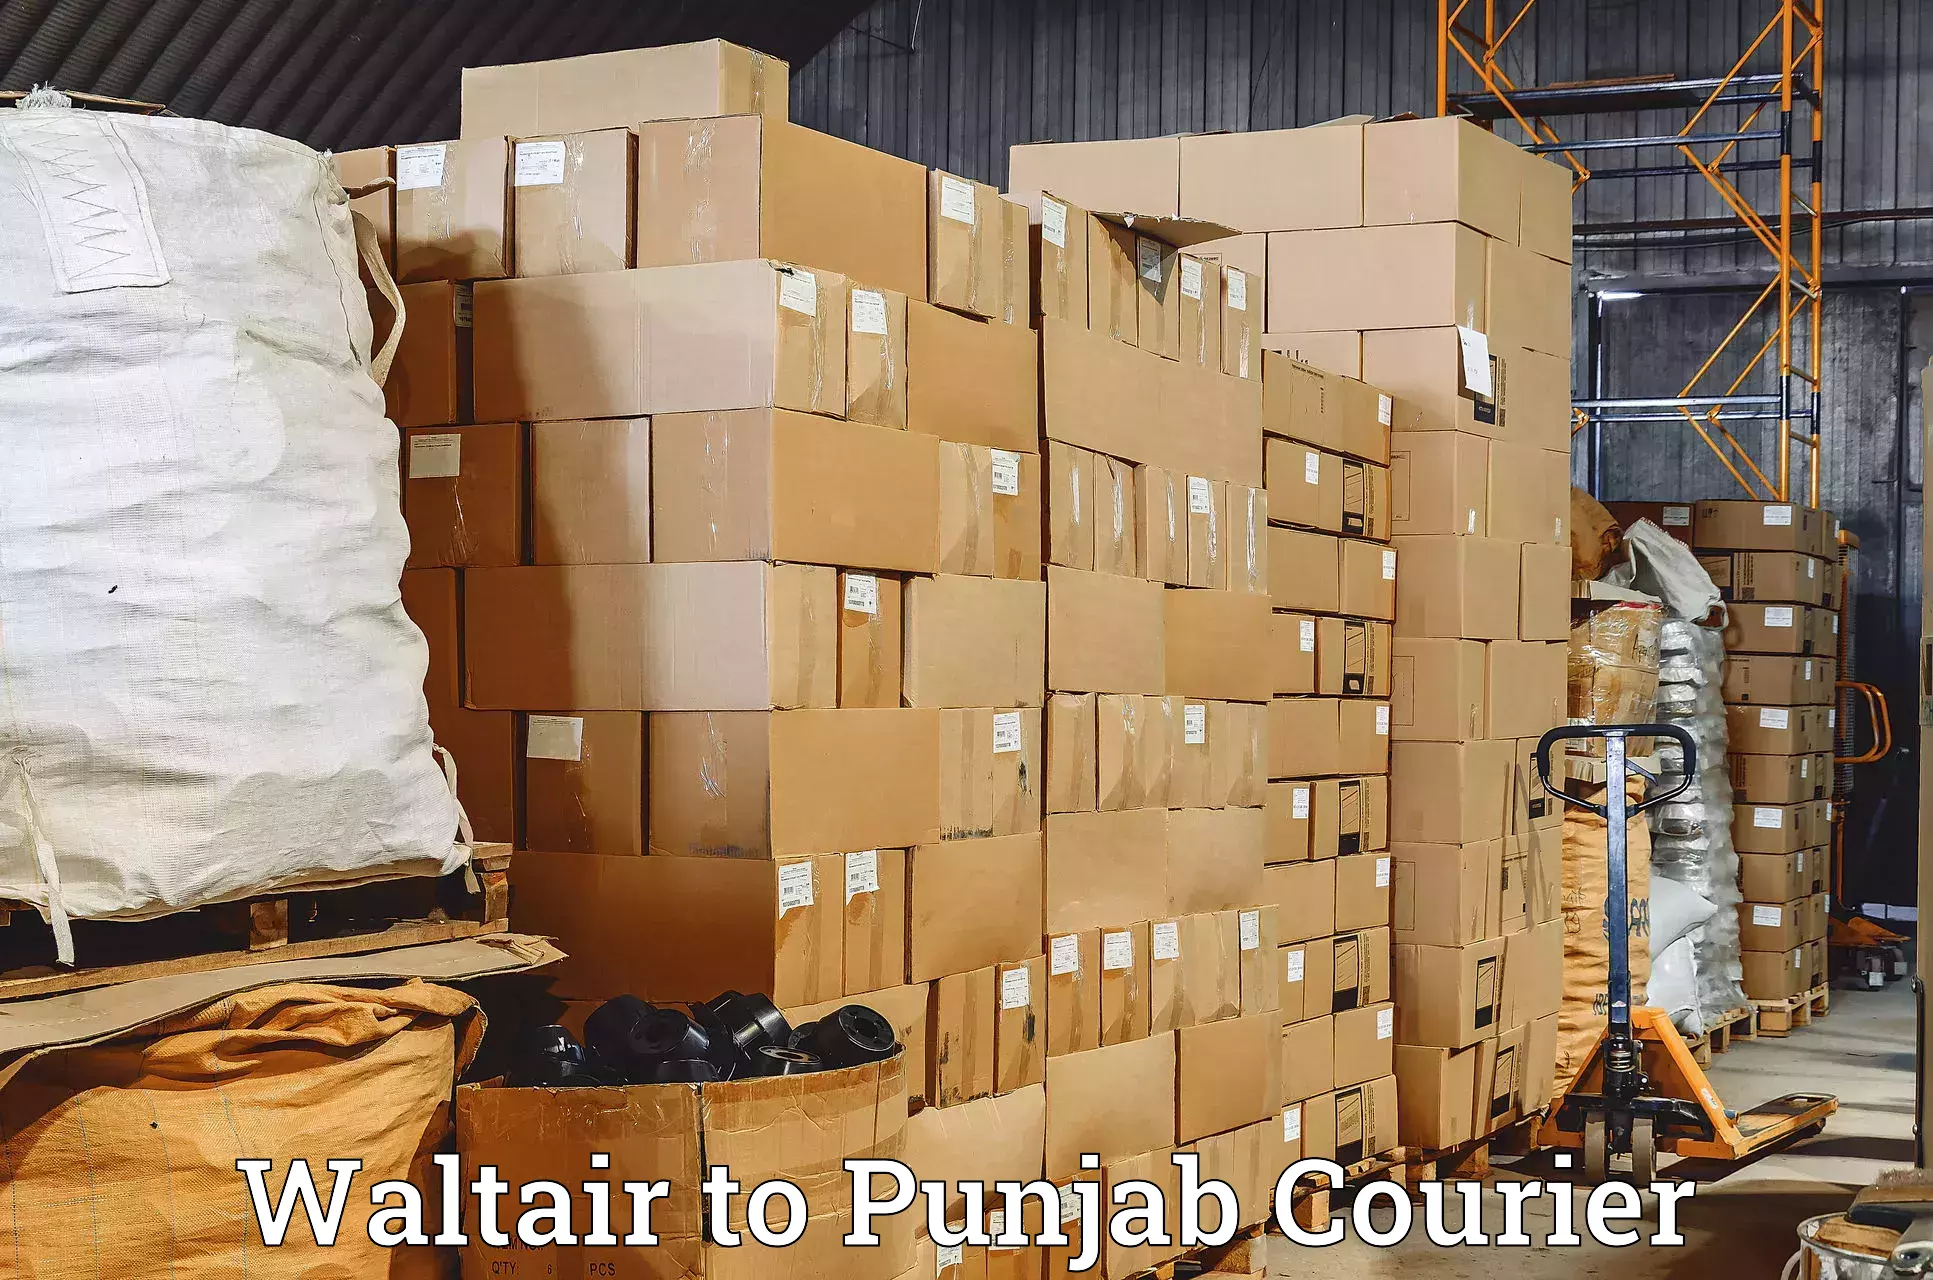 Global shipping solutions Waltair to Sirhind Fatehgarh